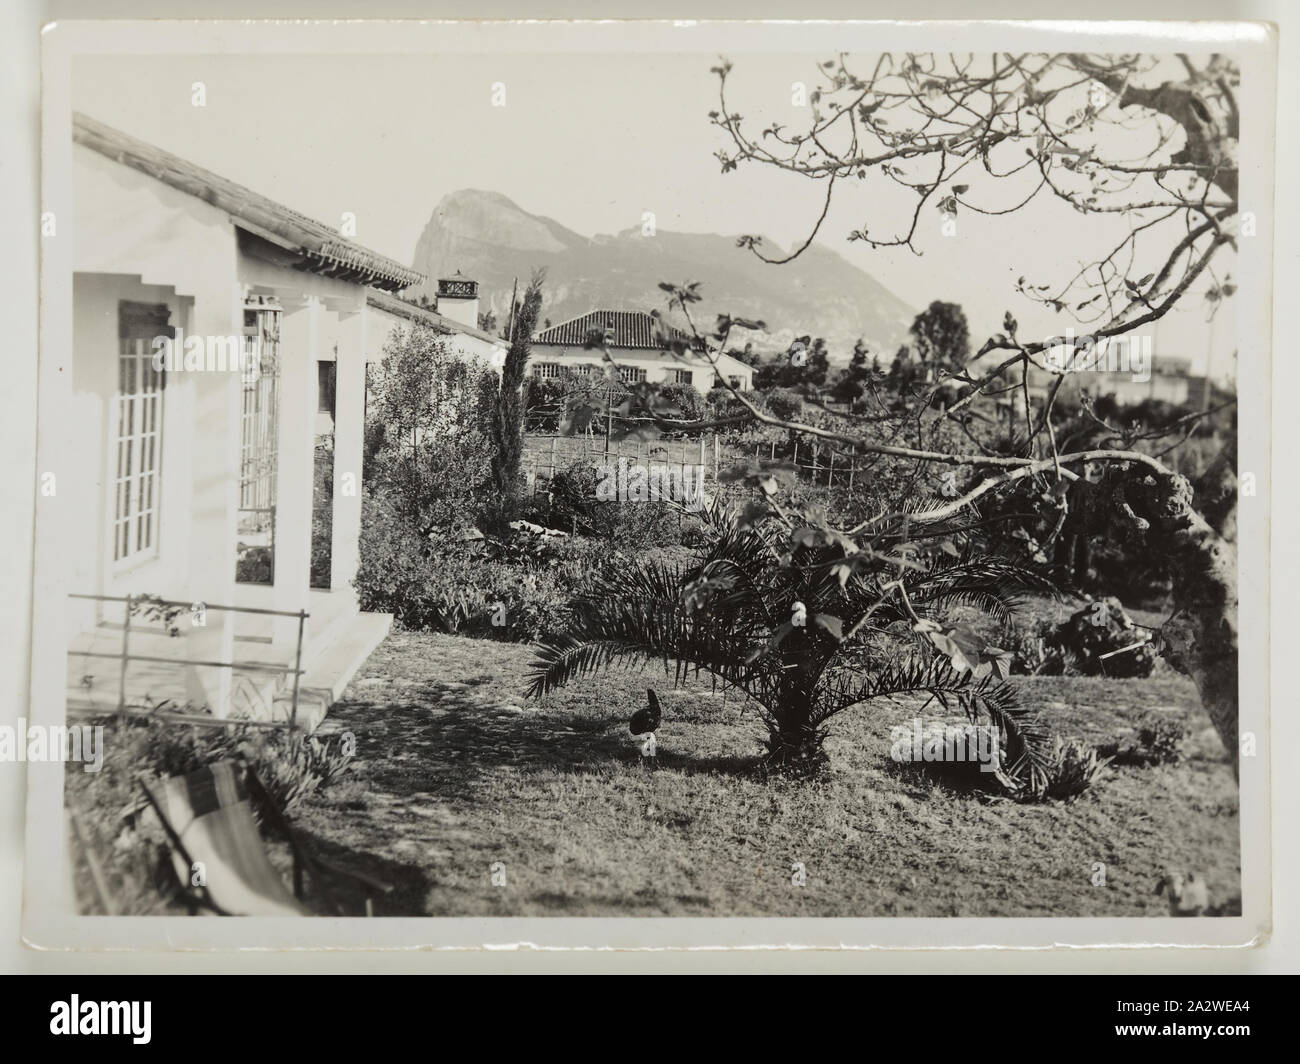 Photograph - Casita Verde, La Linea, Spain, circa 1936, Photograph of a house in La Linea Spain overlooking the Rock of Gibraltar, circa 1936. The image is a picture of John Gordon-Kirkby's first home. John was born in Gibraltar on 26 August 1936. His parents lived in La Linea but due to the political instability in Spain at the time they went across to the hospital in Gibraltar so he could be born on British soil. John lived in Morocco and briefly Stock Photo